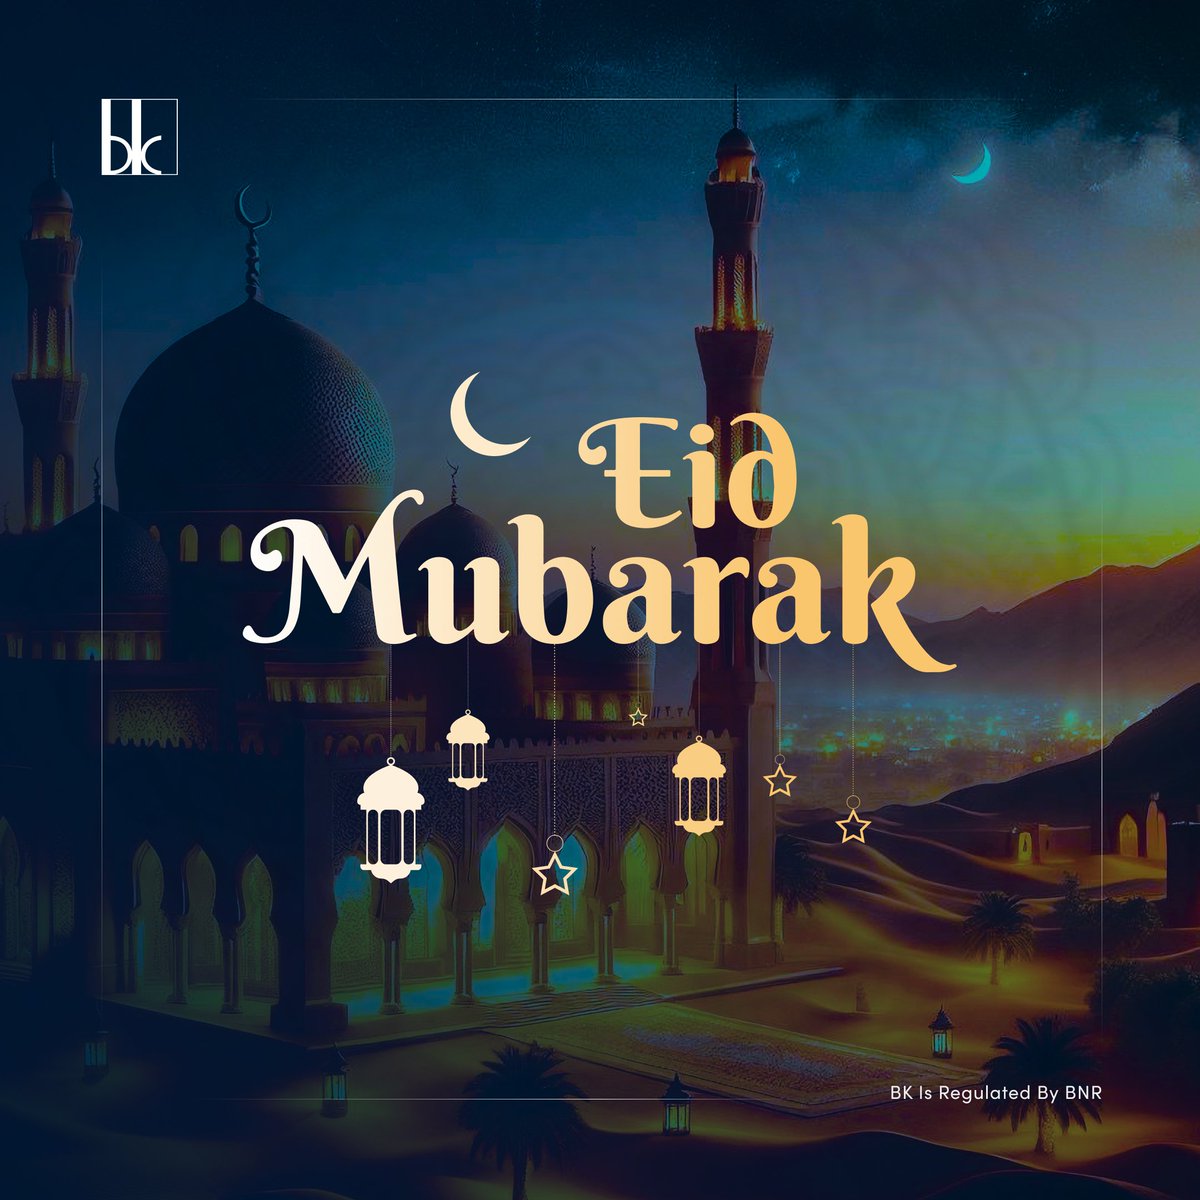 Bank of Kigali extends it’s warm wishes to all the clients, partners and friends celebrating Eid Al Fitr today. #EidMubarak